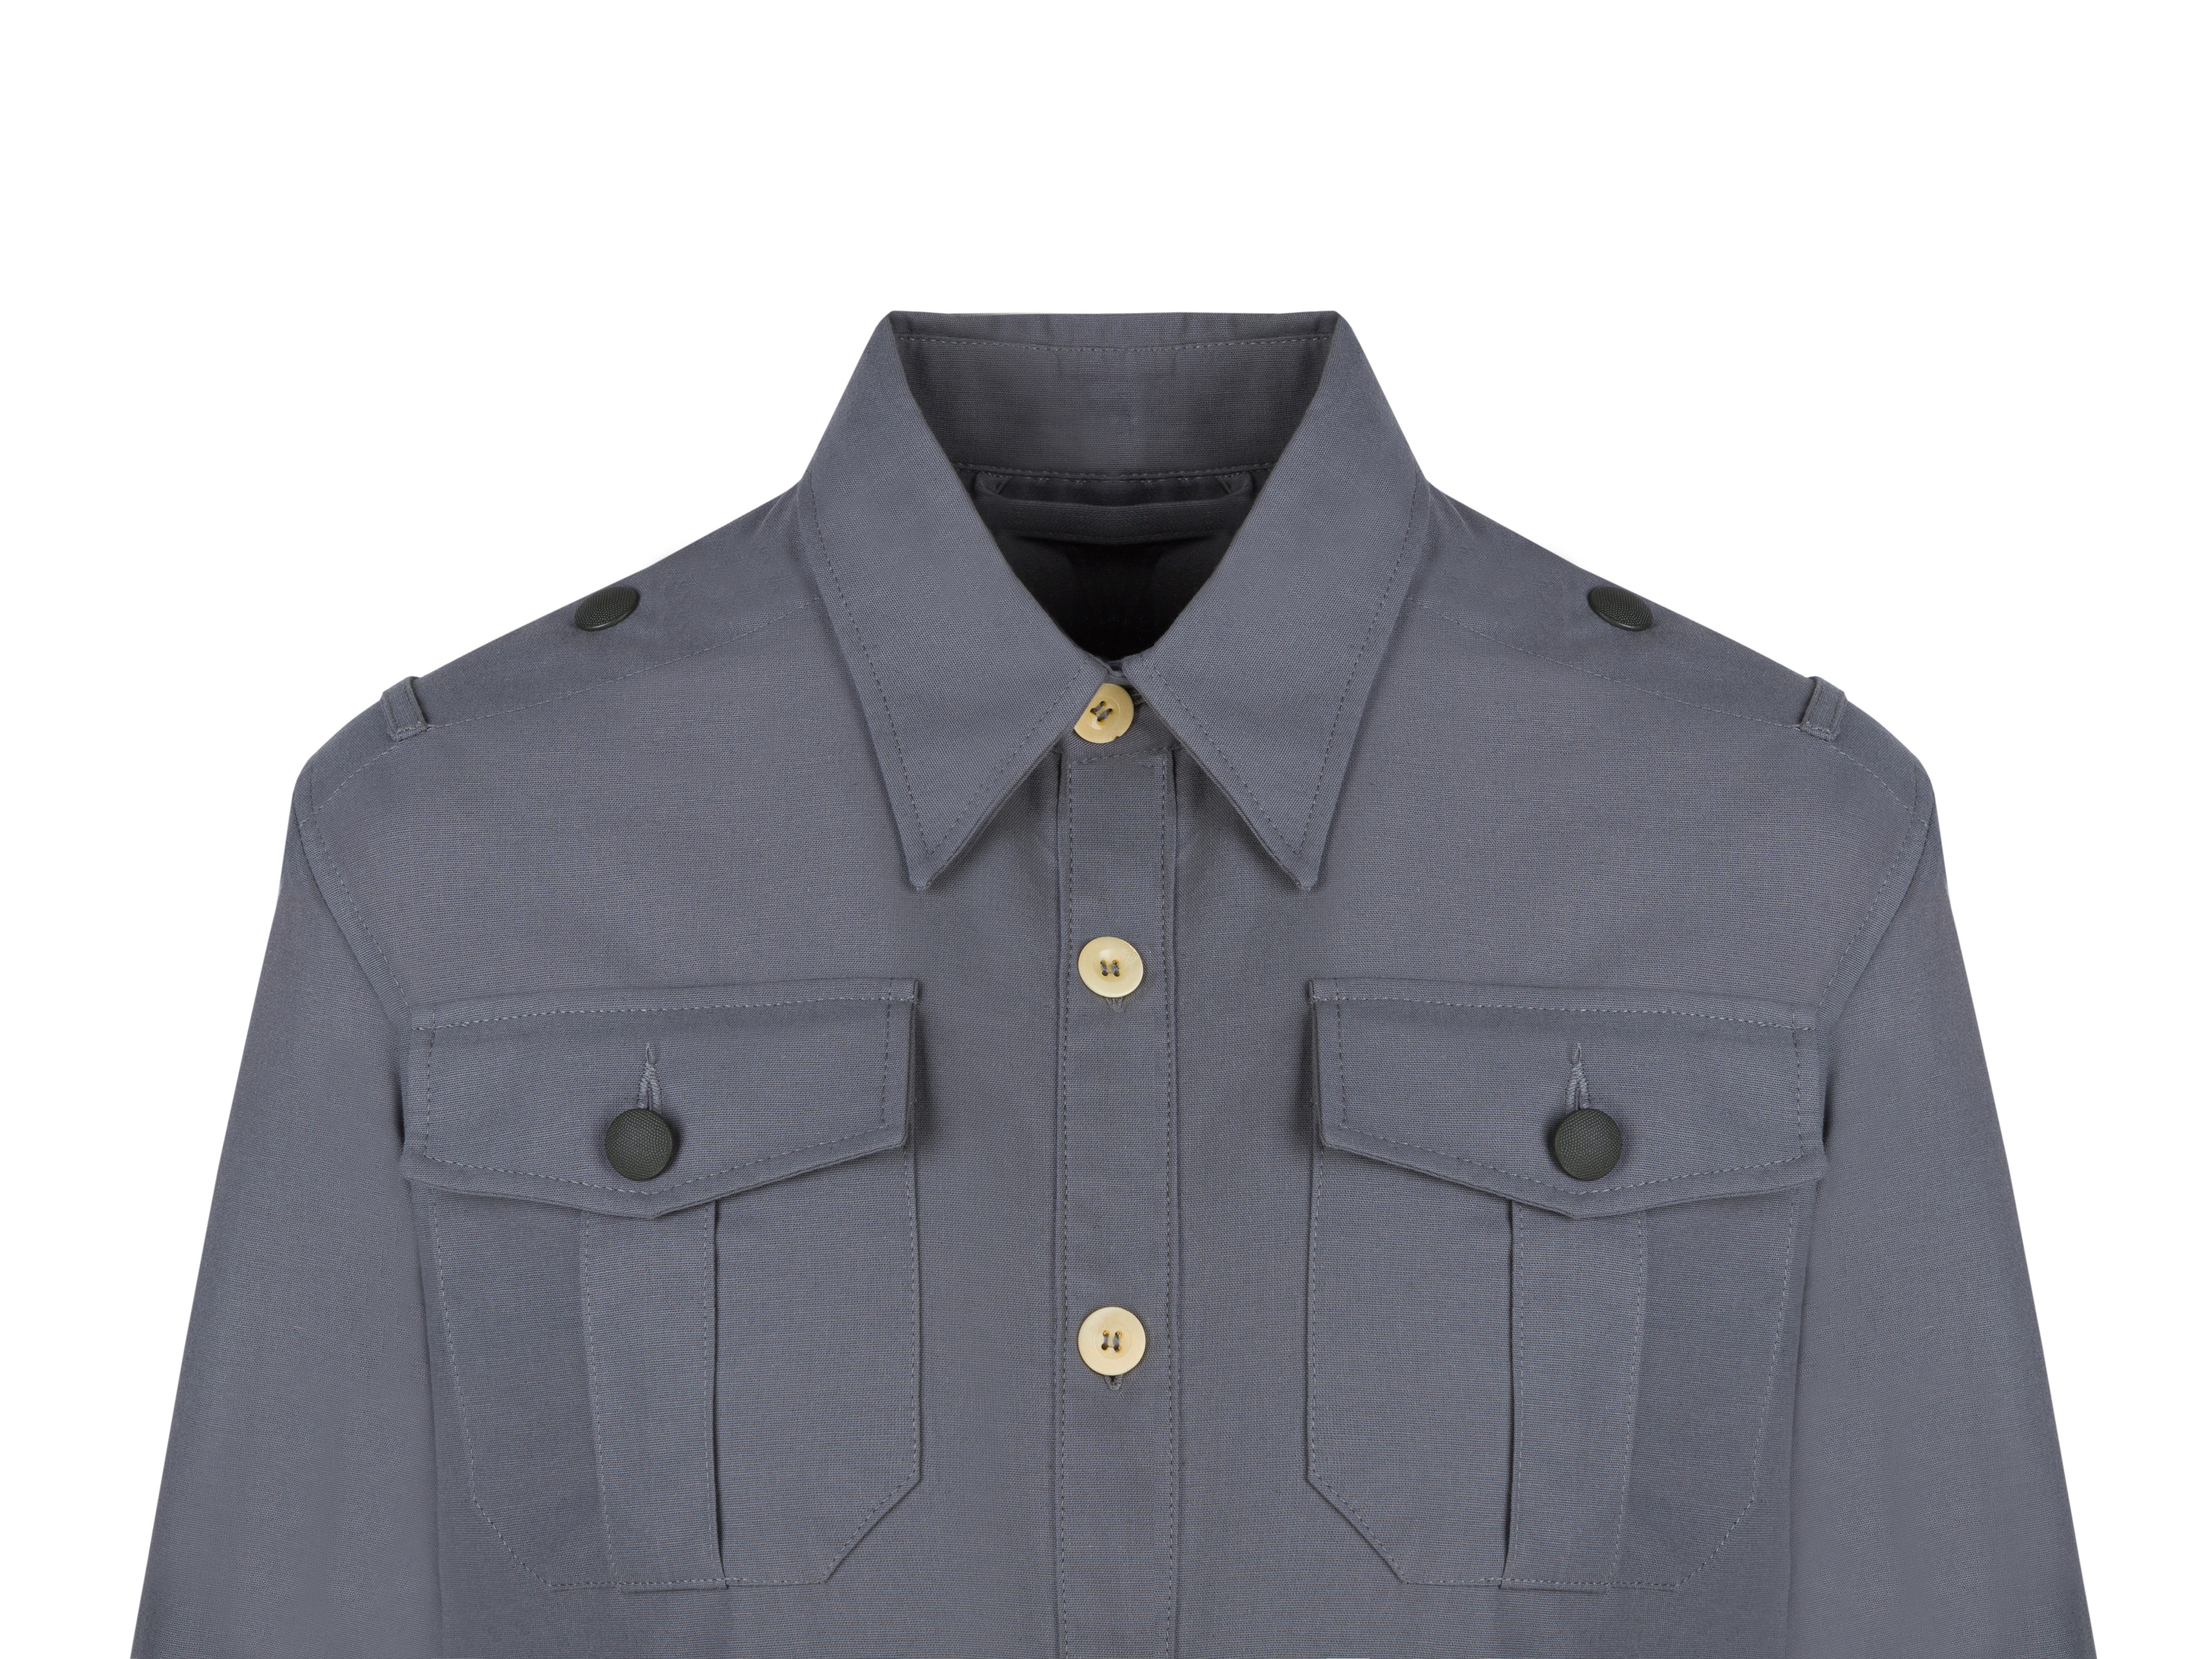 Hemd M43 - uniform shirt with buttons for shoulder boards - repro L 29 ...